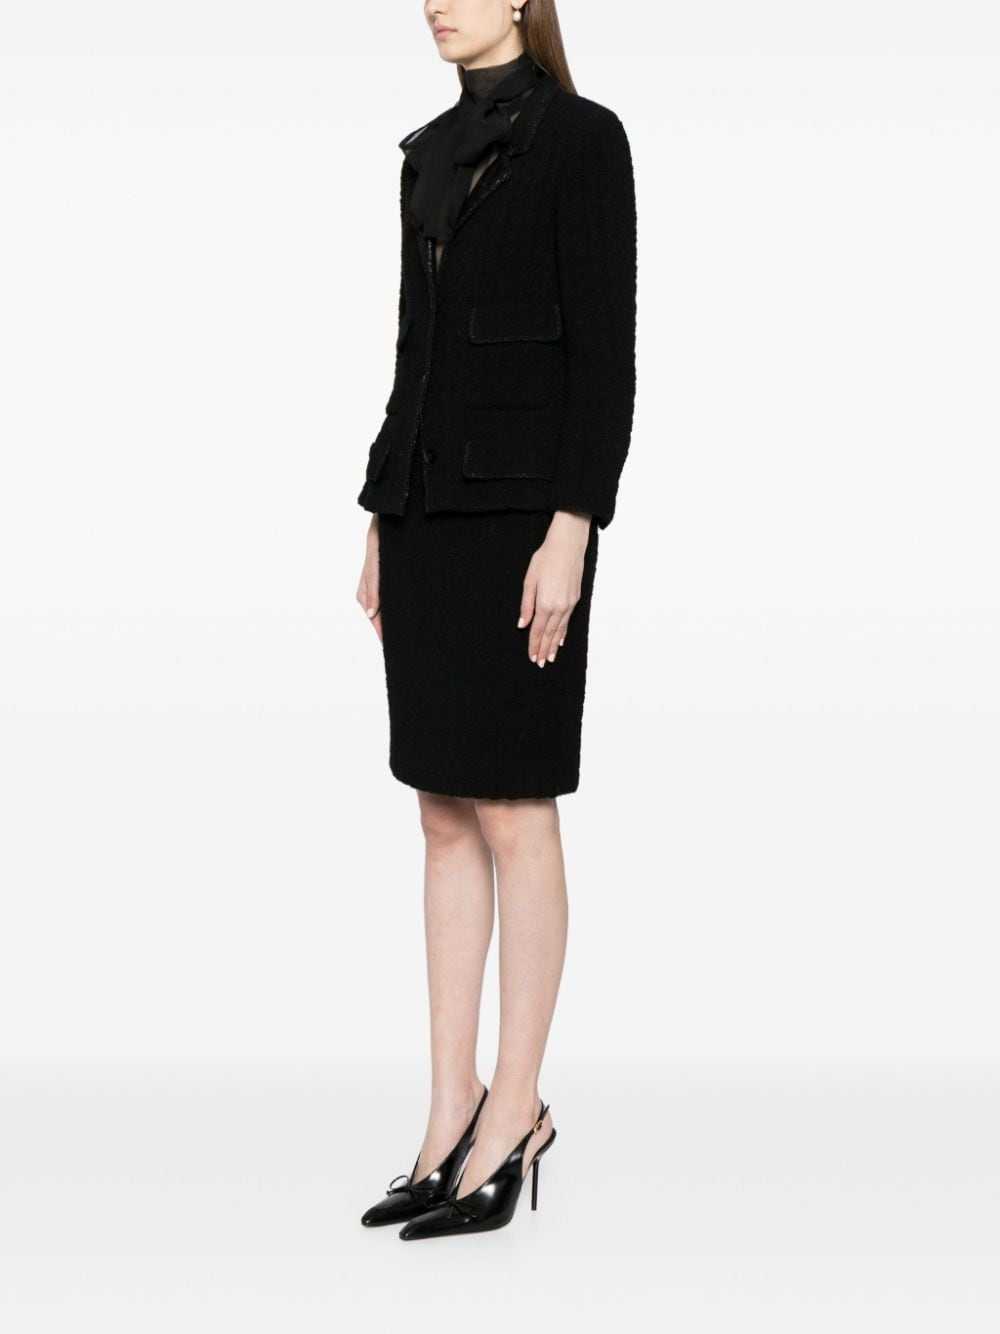 CHANEL Pre-Owned 1998 textured skirt suit - Black - image 3